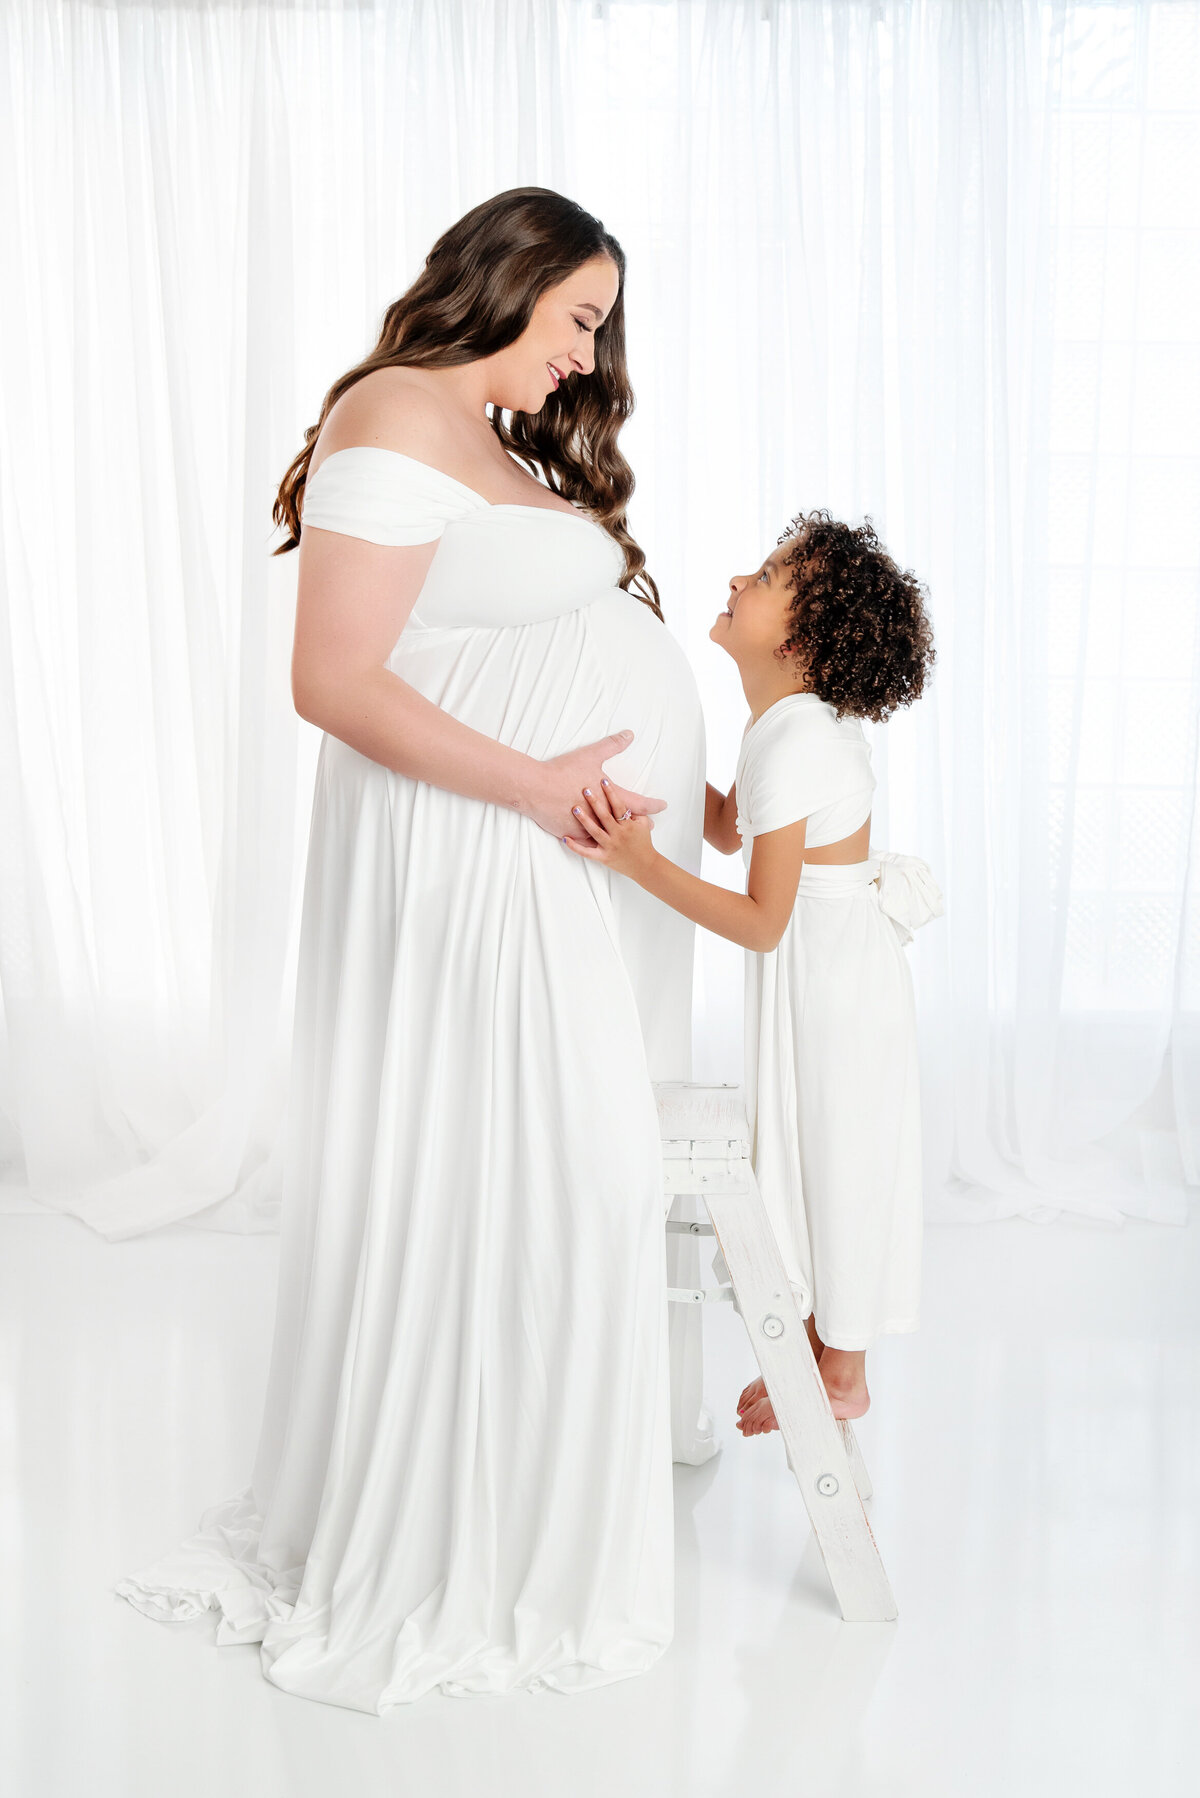 st-louis-maternity-photographer-mother-and-child-smiling-at-eachother-holding-pregnant-belly-dressed-in-monocromatic-white-outfits-against-white-background